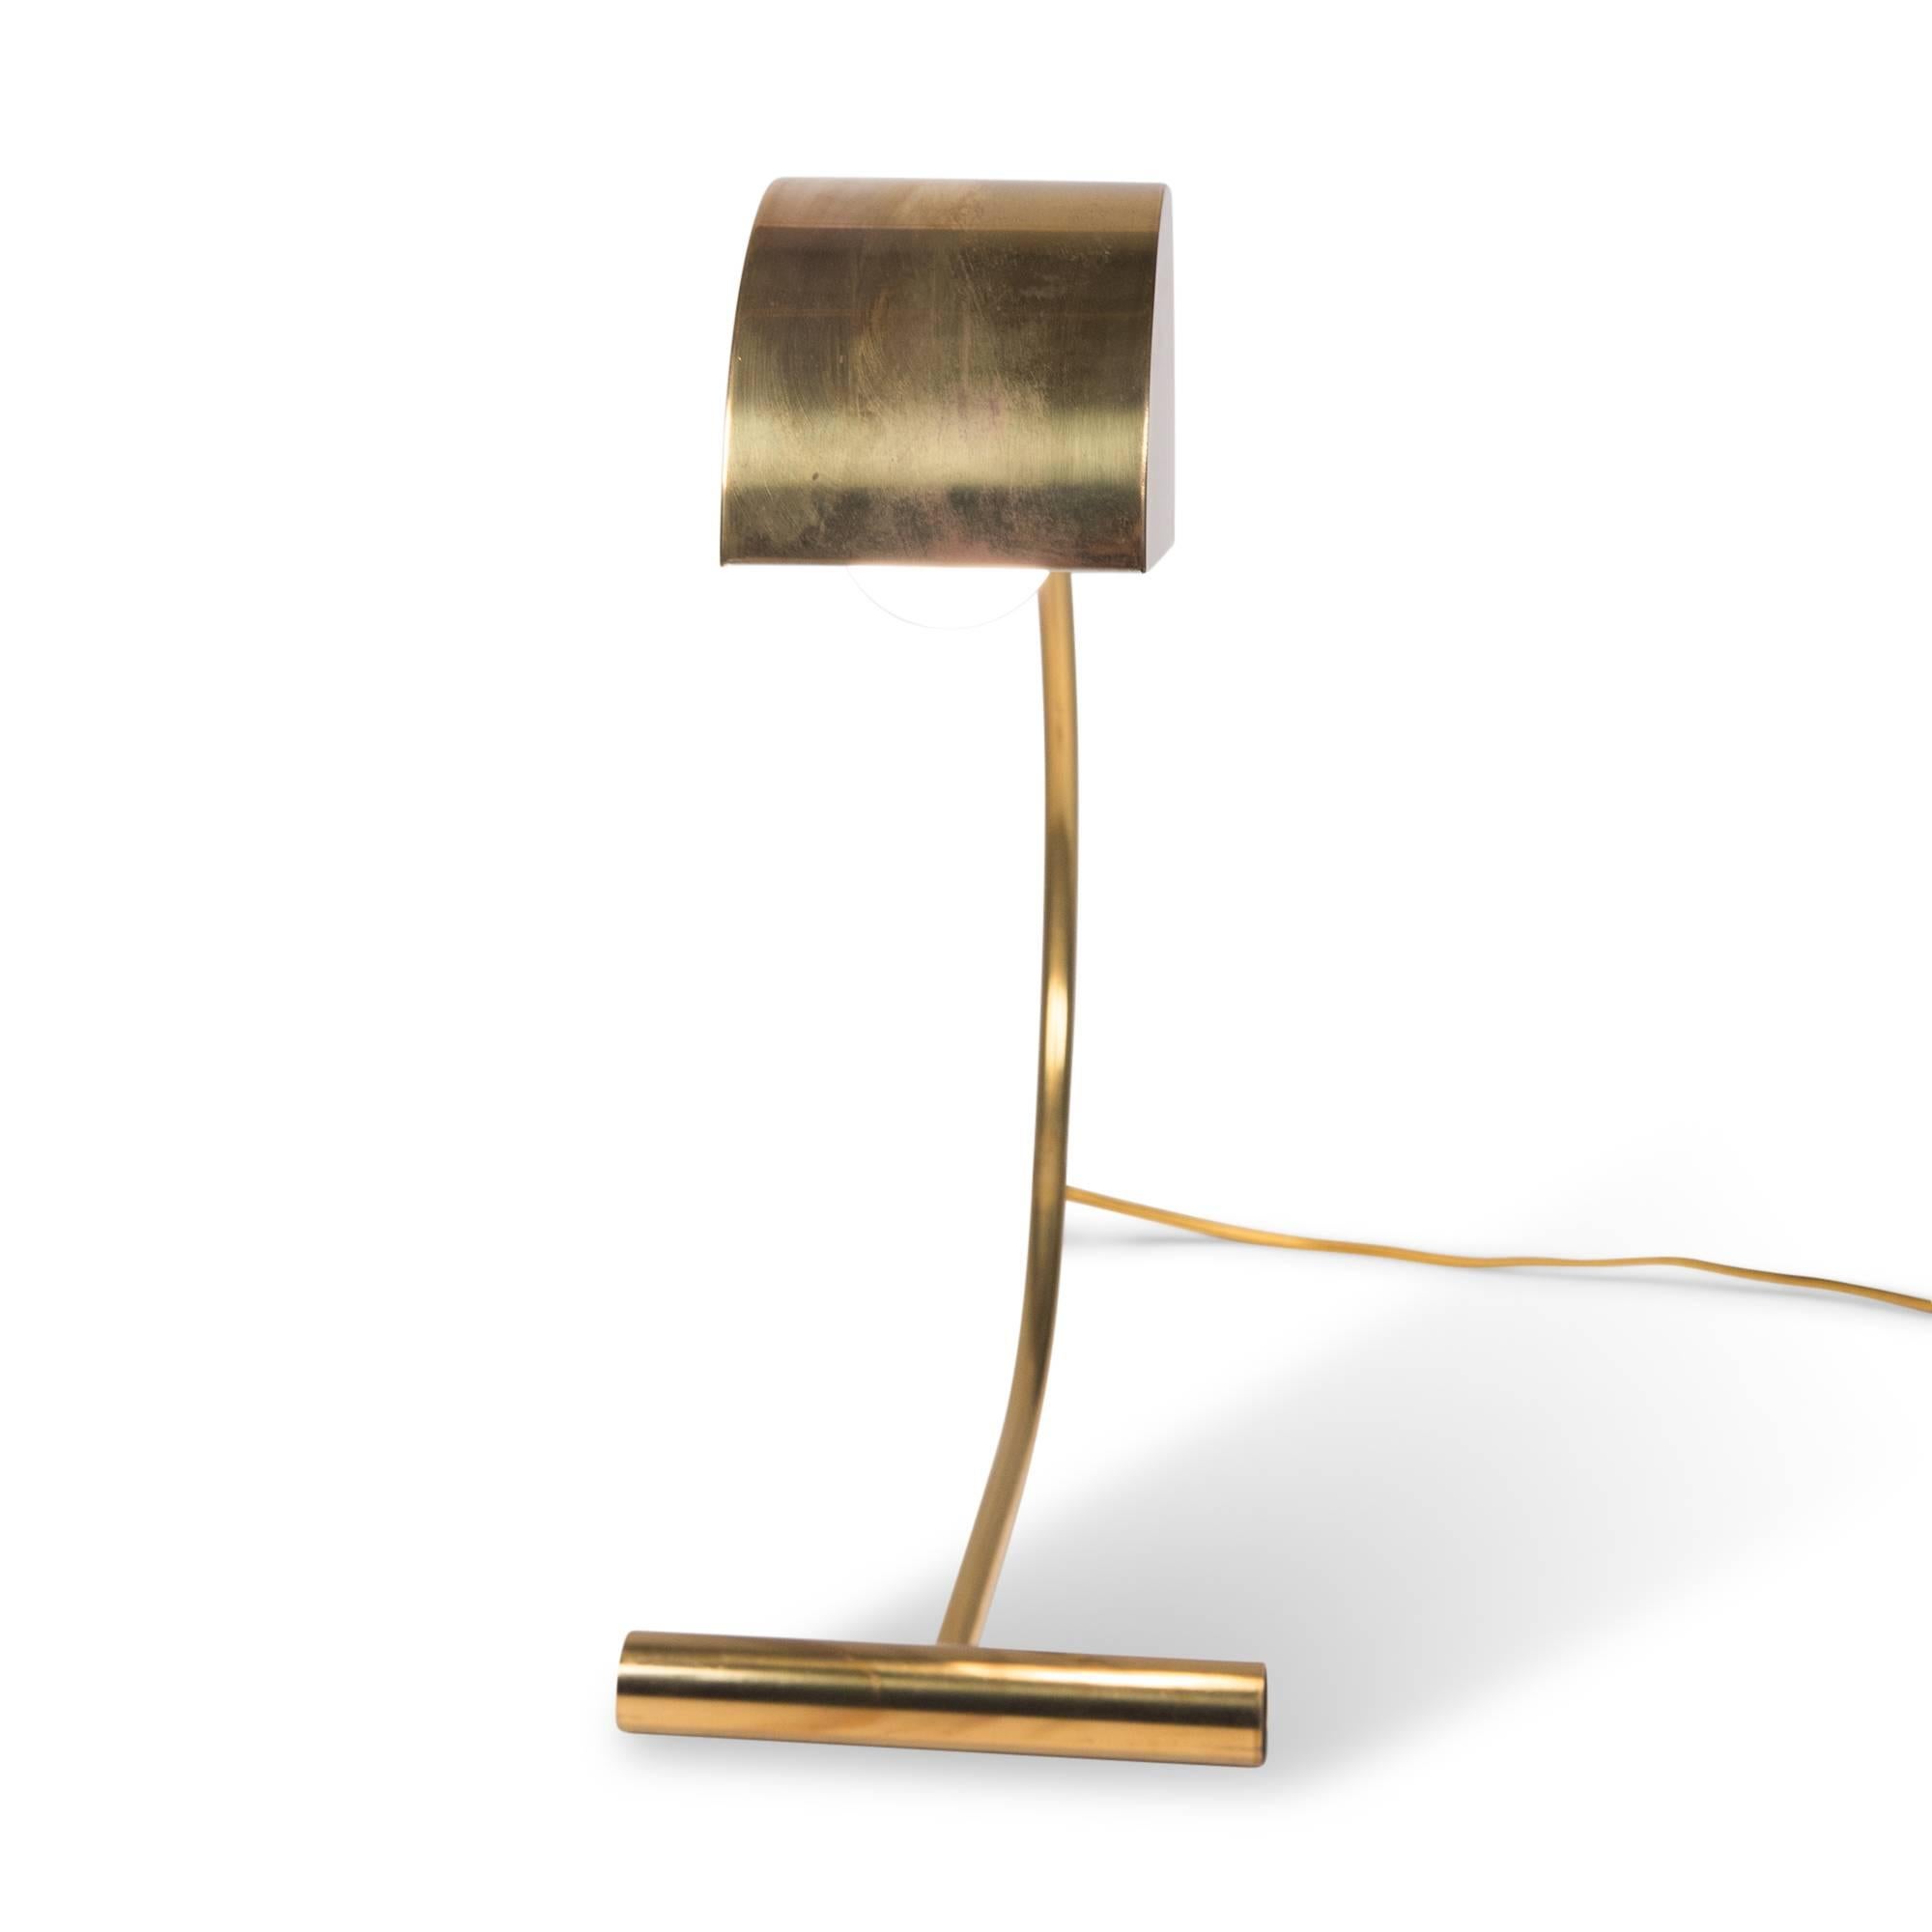 Mid-20th Century Polished Brass Desk Lamp, American, 1960s For Sale